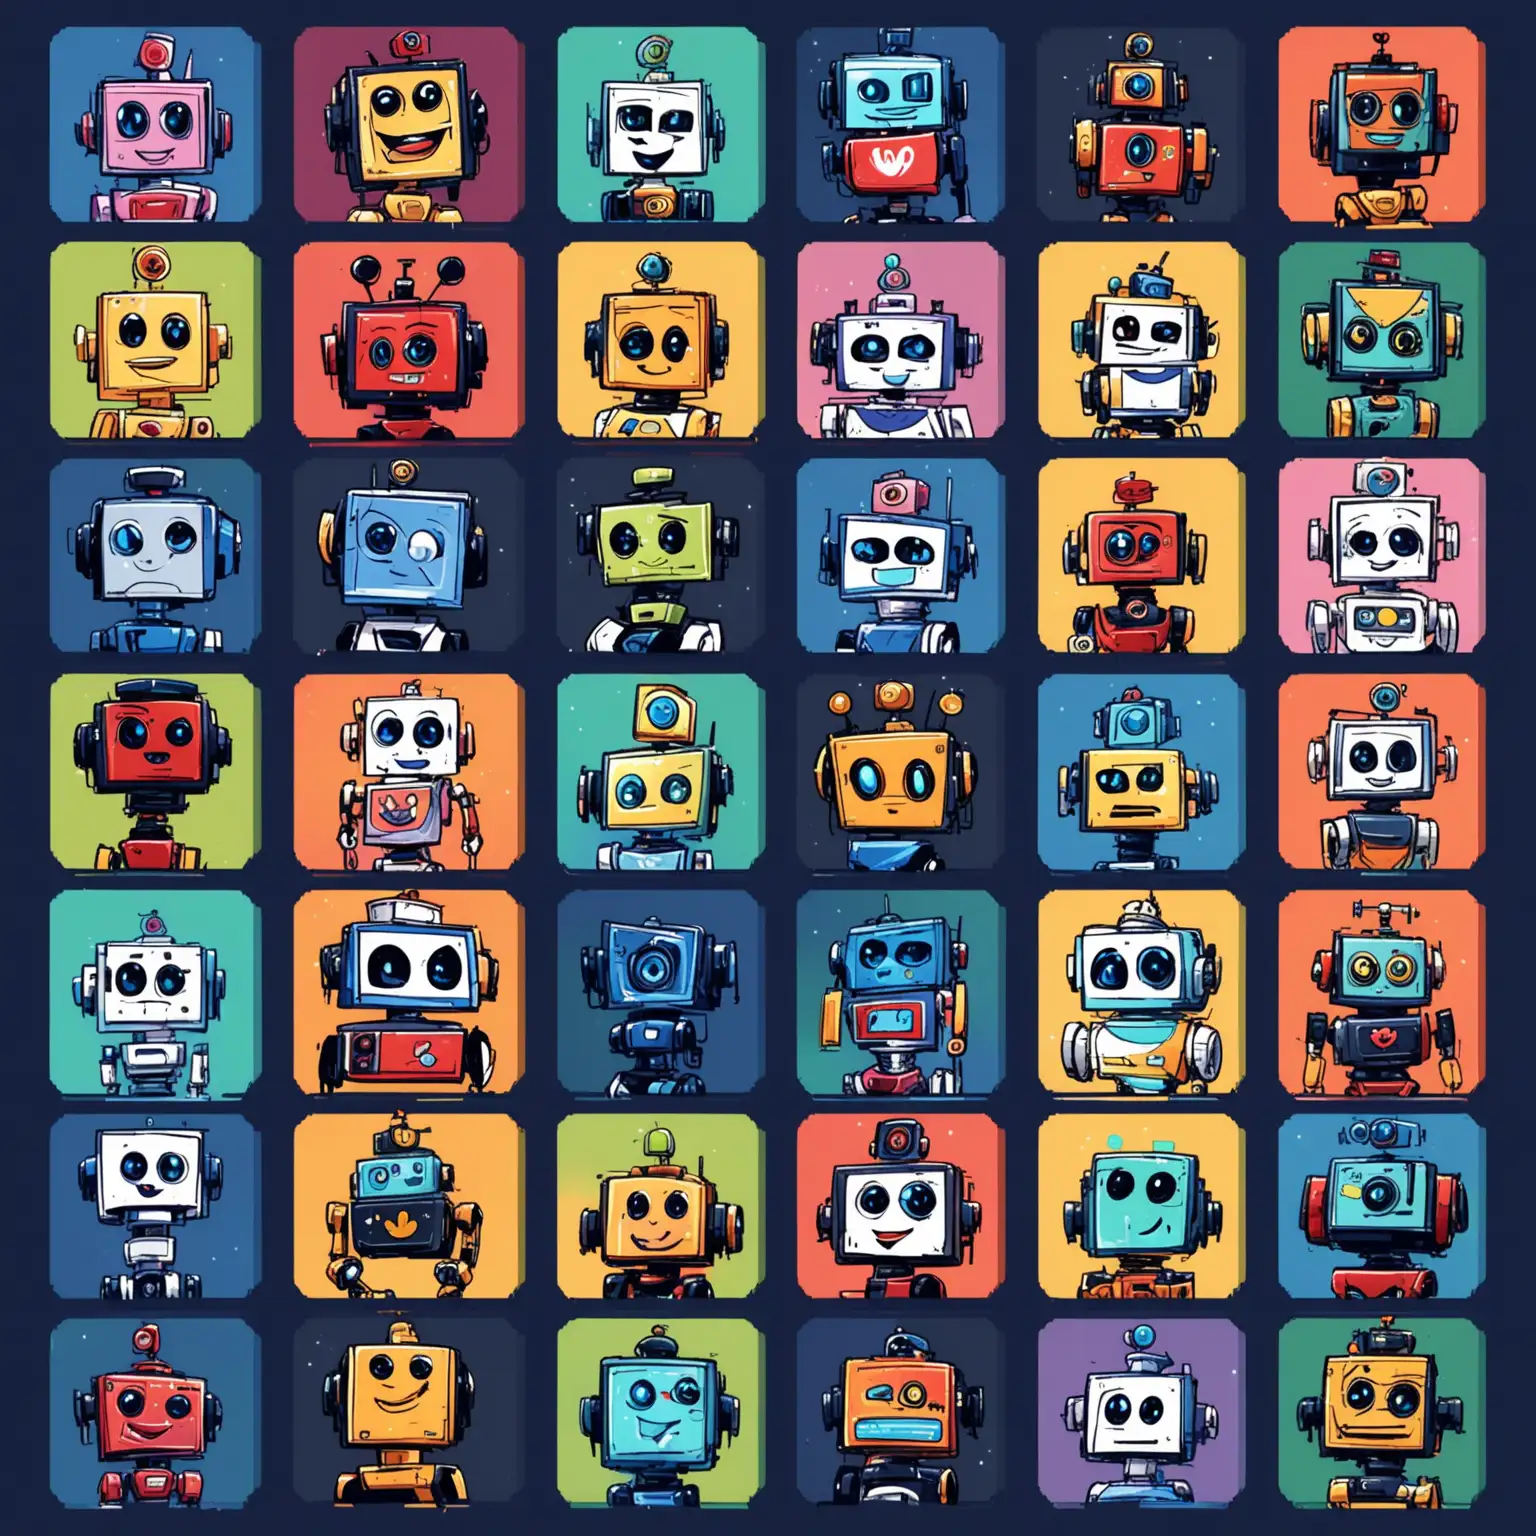 used for social media robot icons, Disney style